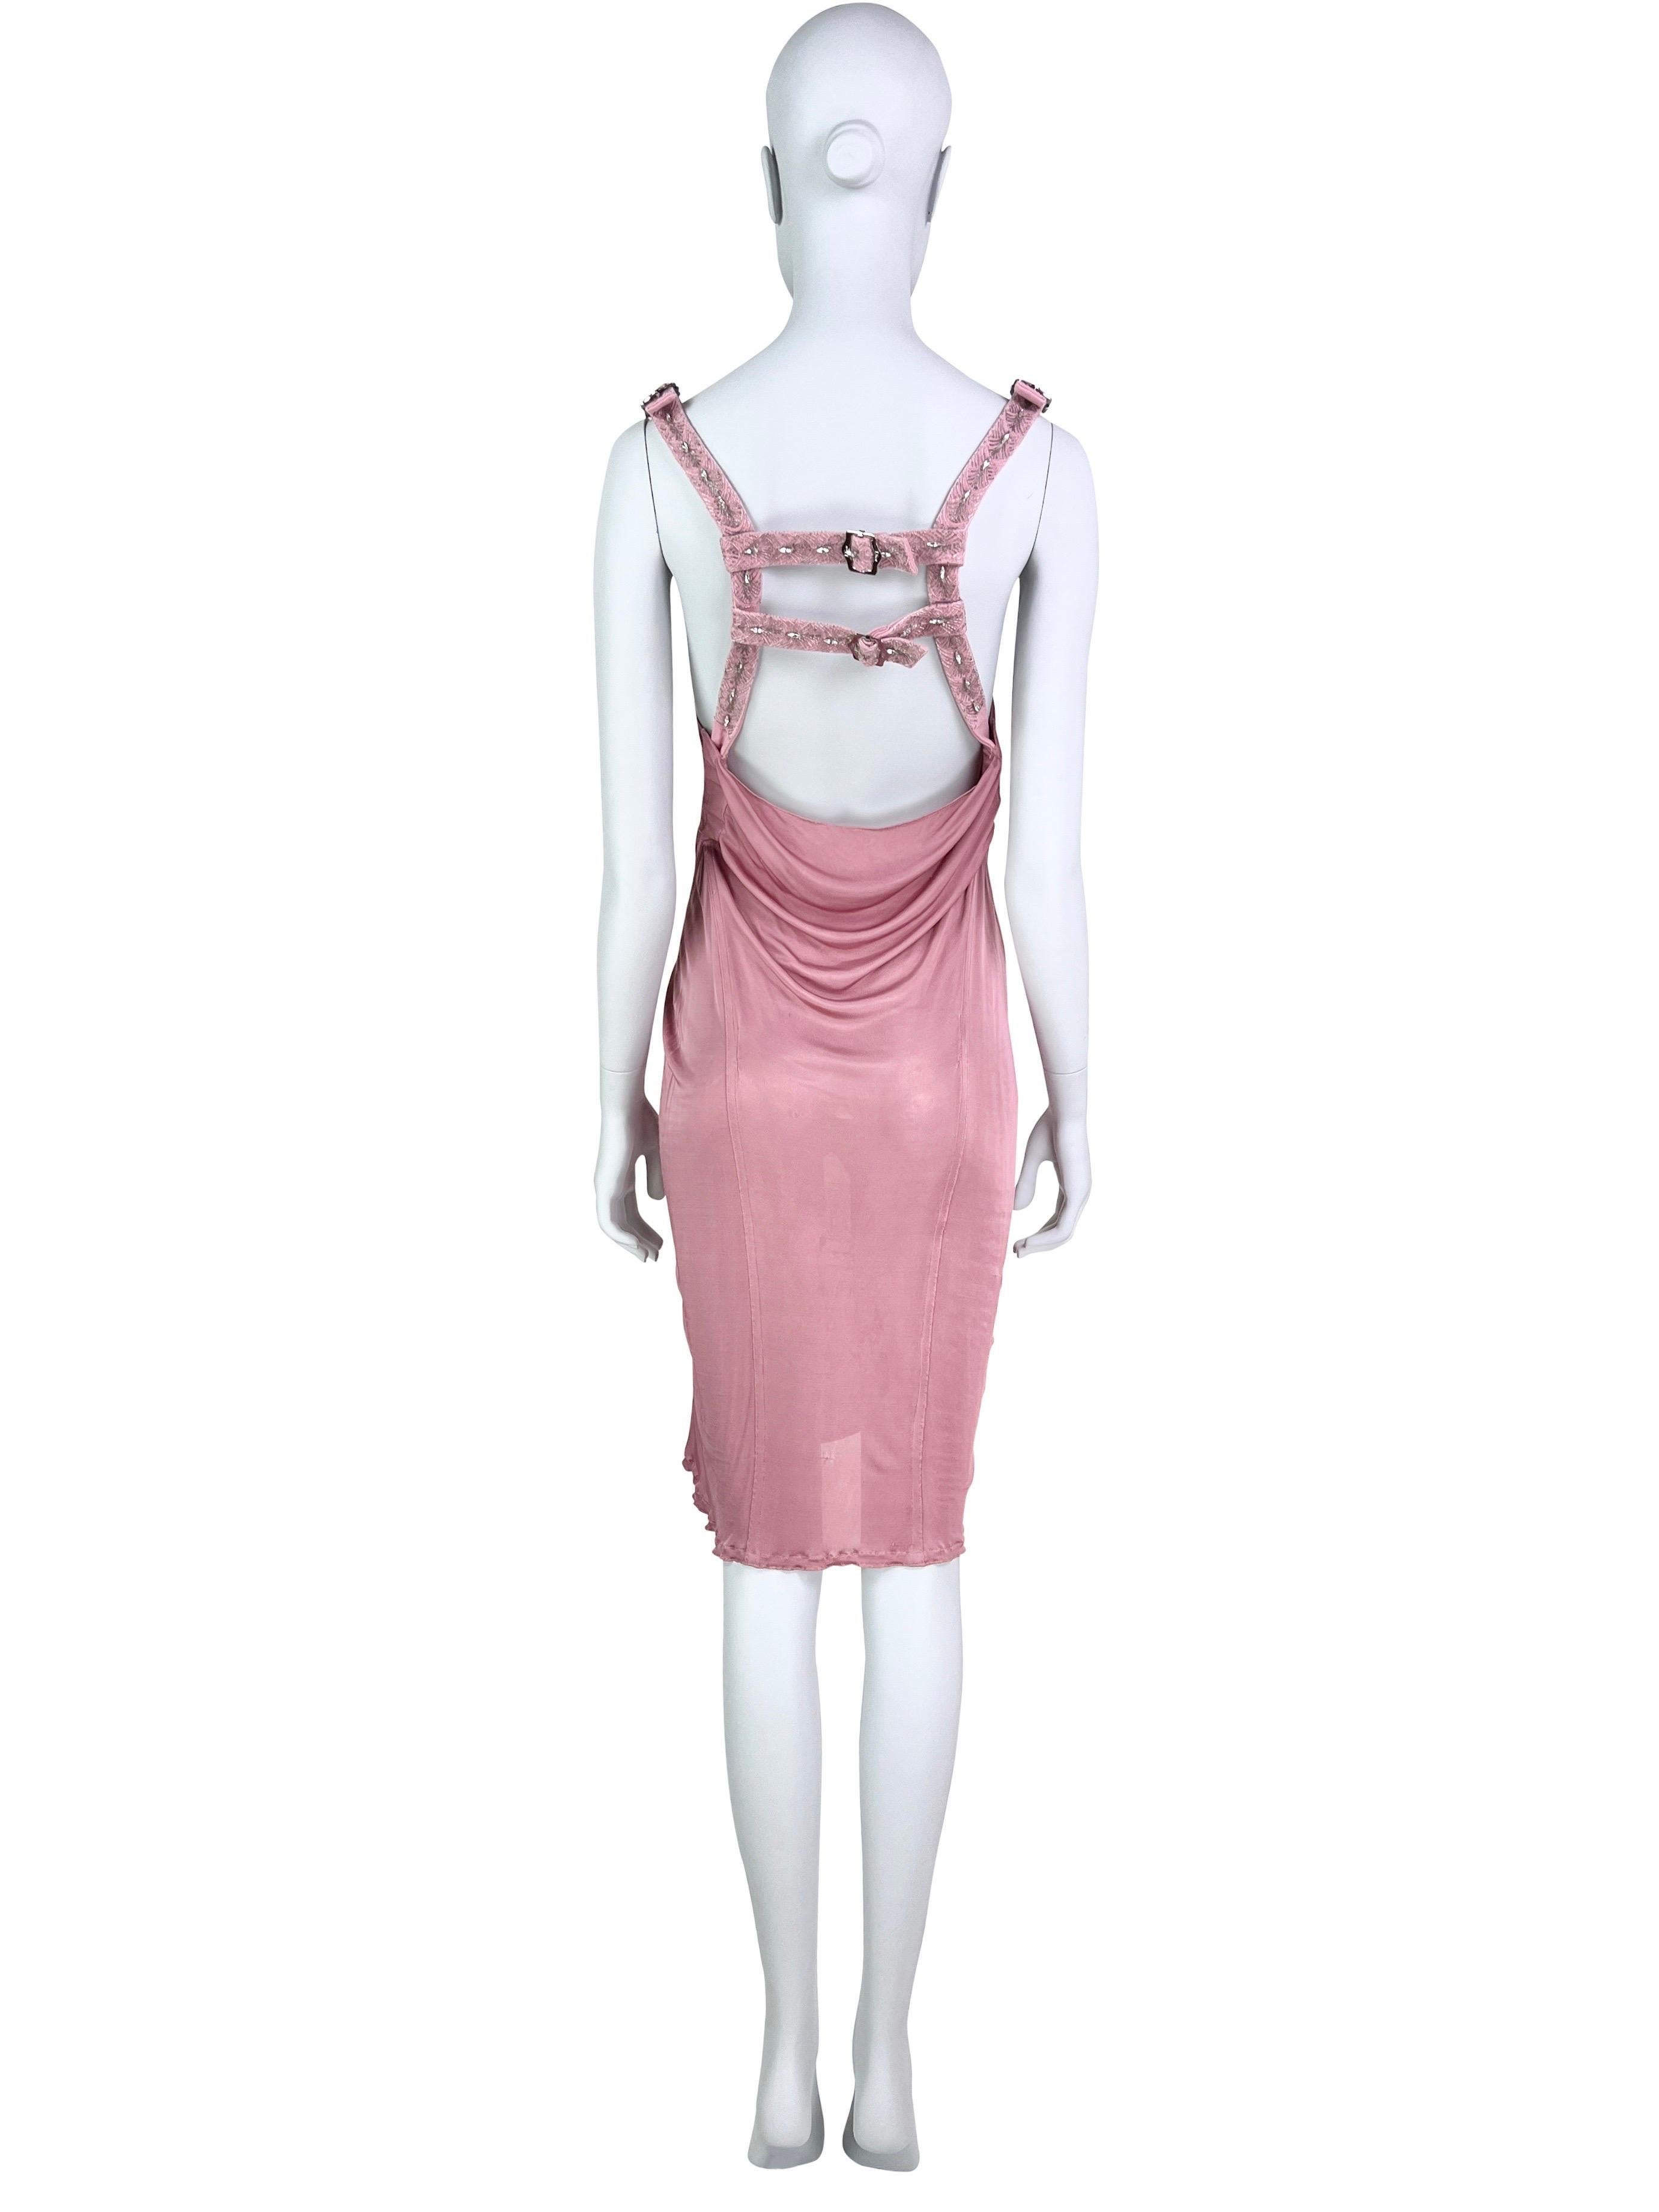 Dior by John Galliano Fall 2003 Embellished Silk Dress For Sale 3